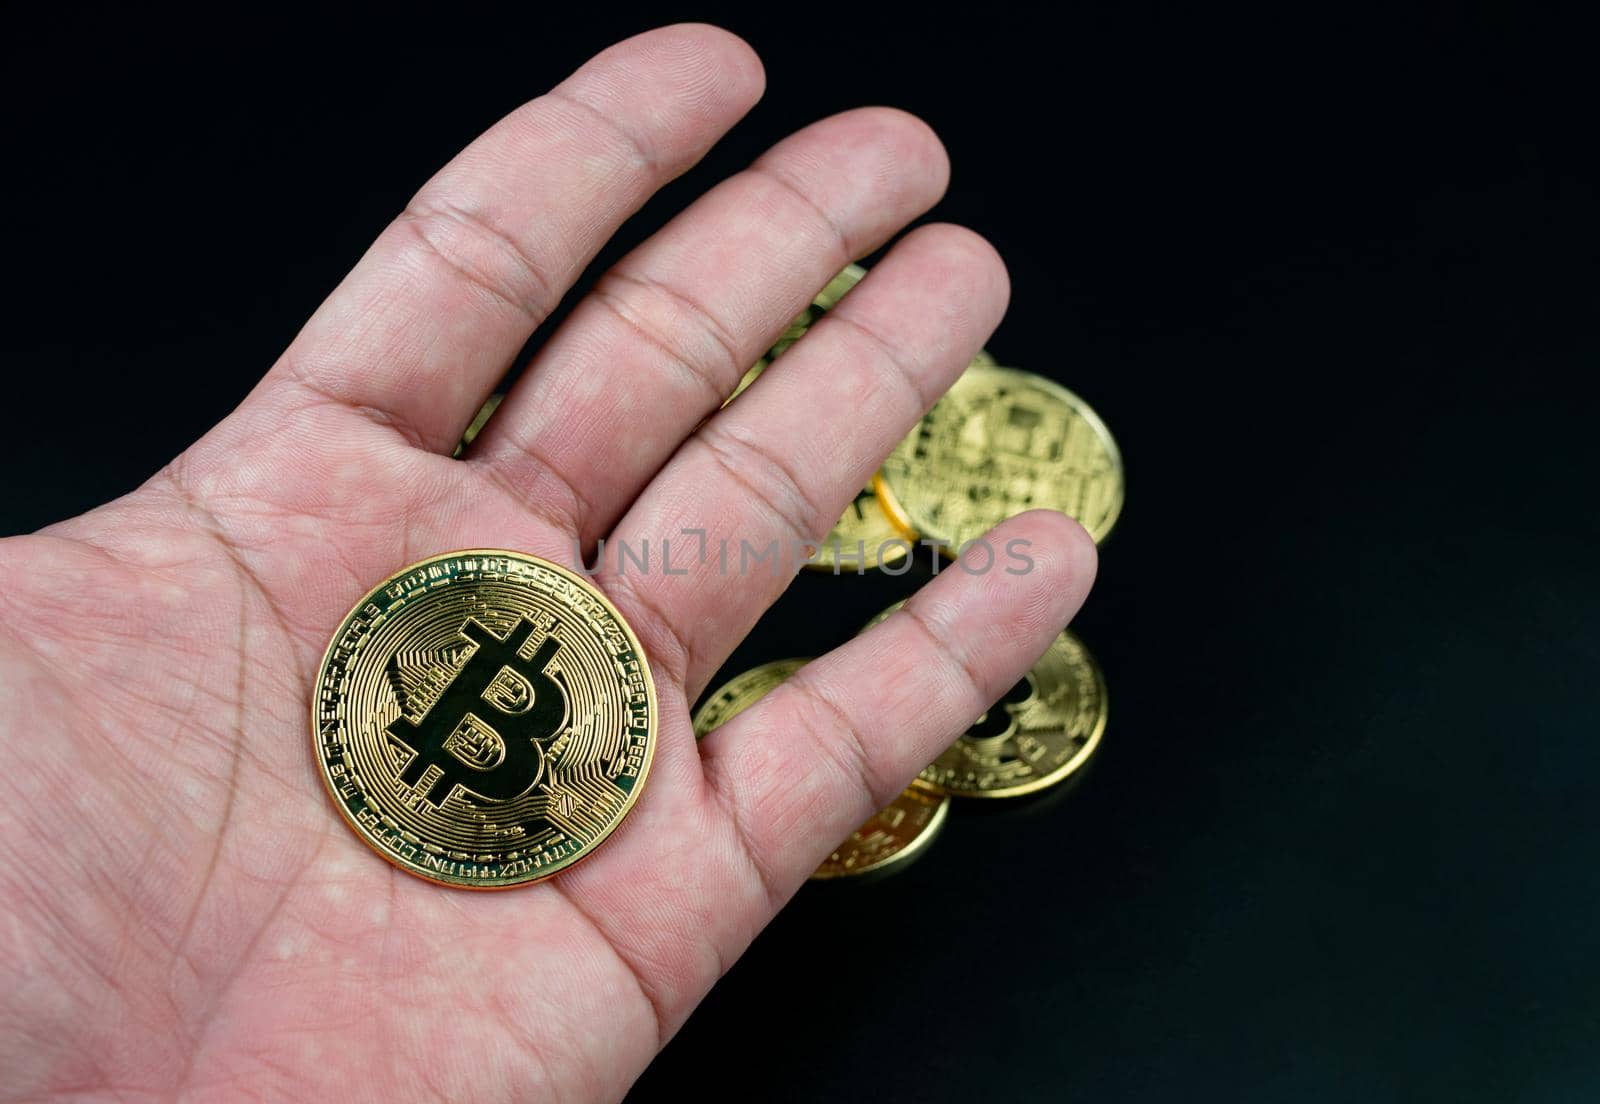 bitcoin coin placed on the hand on a black background by Unimages2527